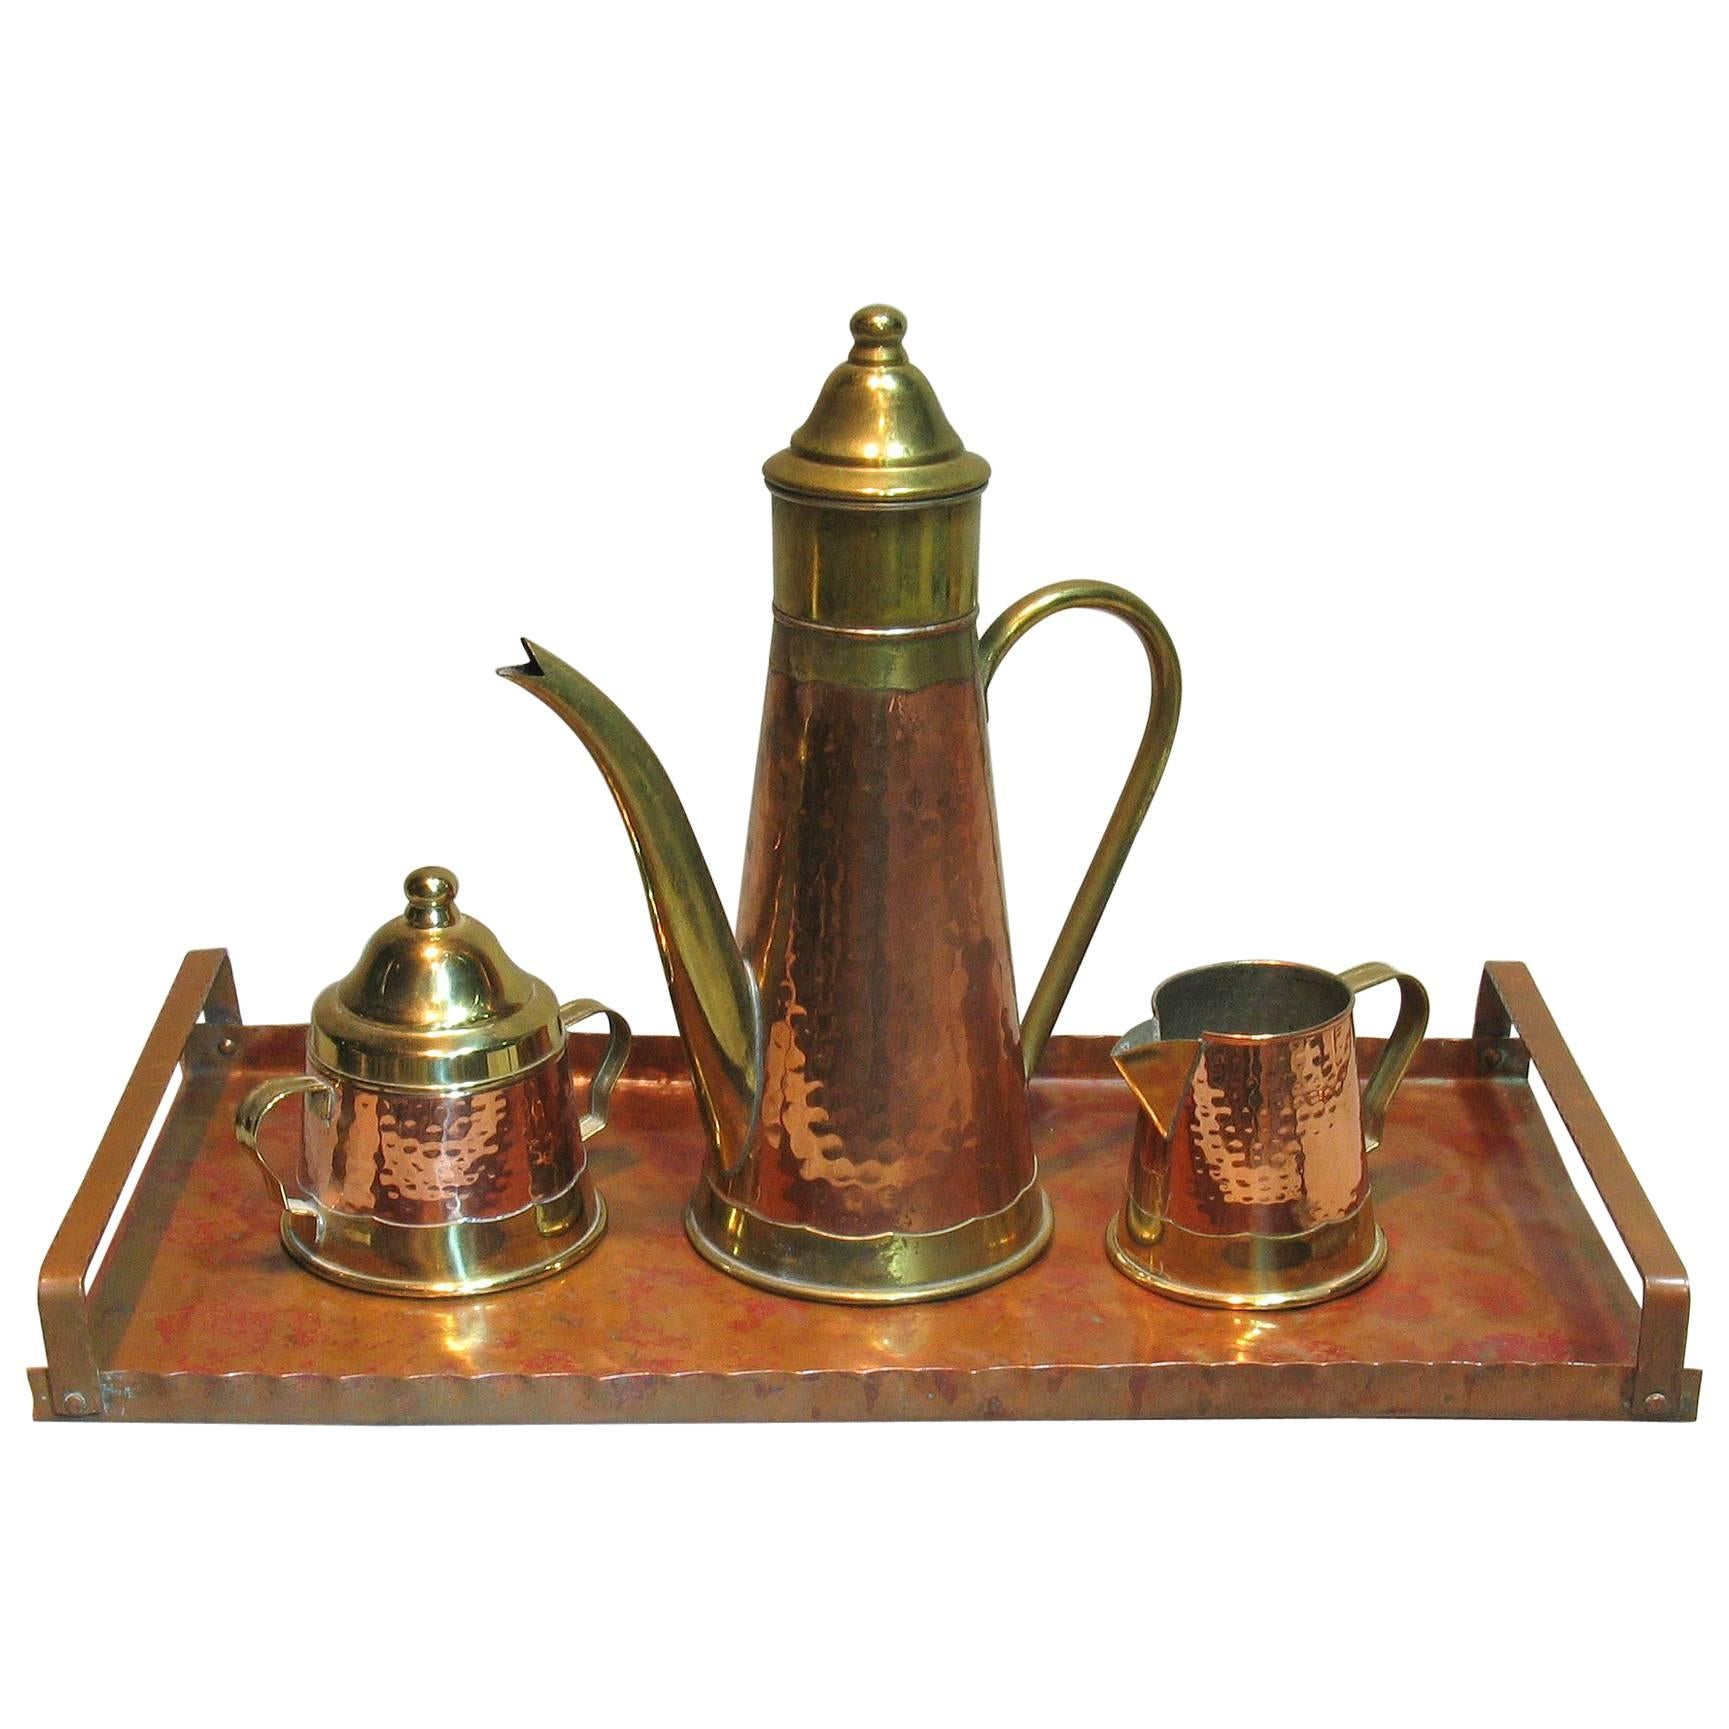 Exquisite Planished Copper and Brass Coffee Set, by Dinanderie de Mecap